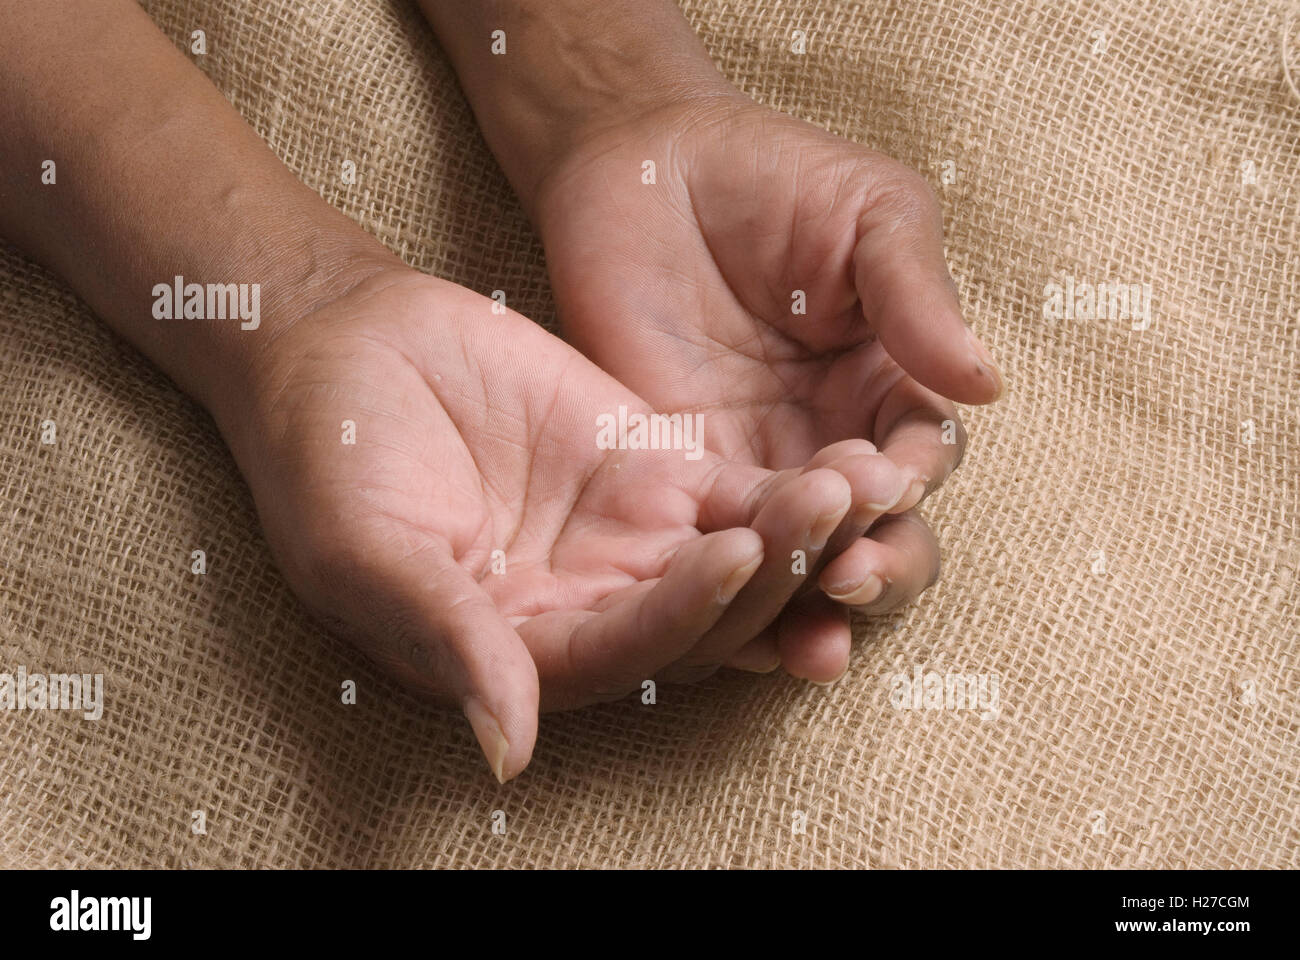 African's open hands begging or asking Stock Photo